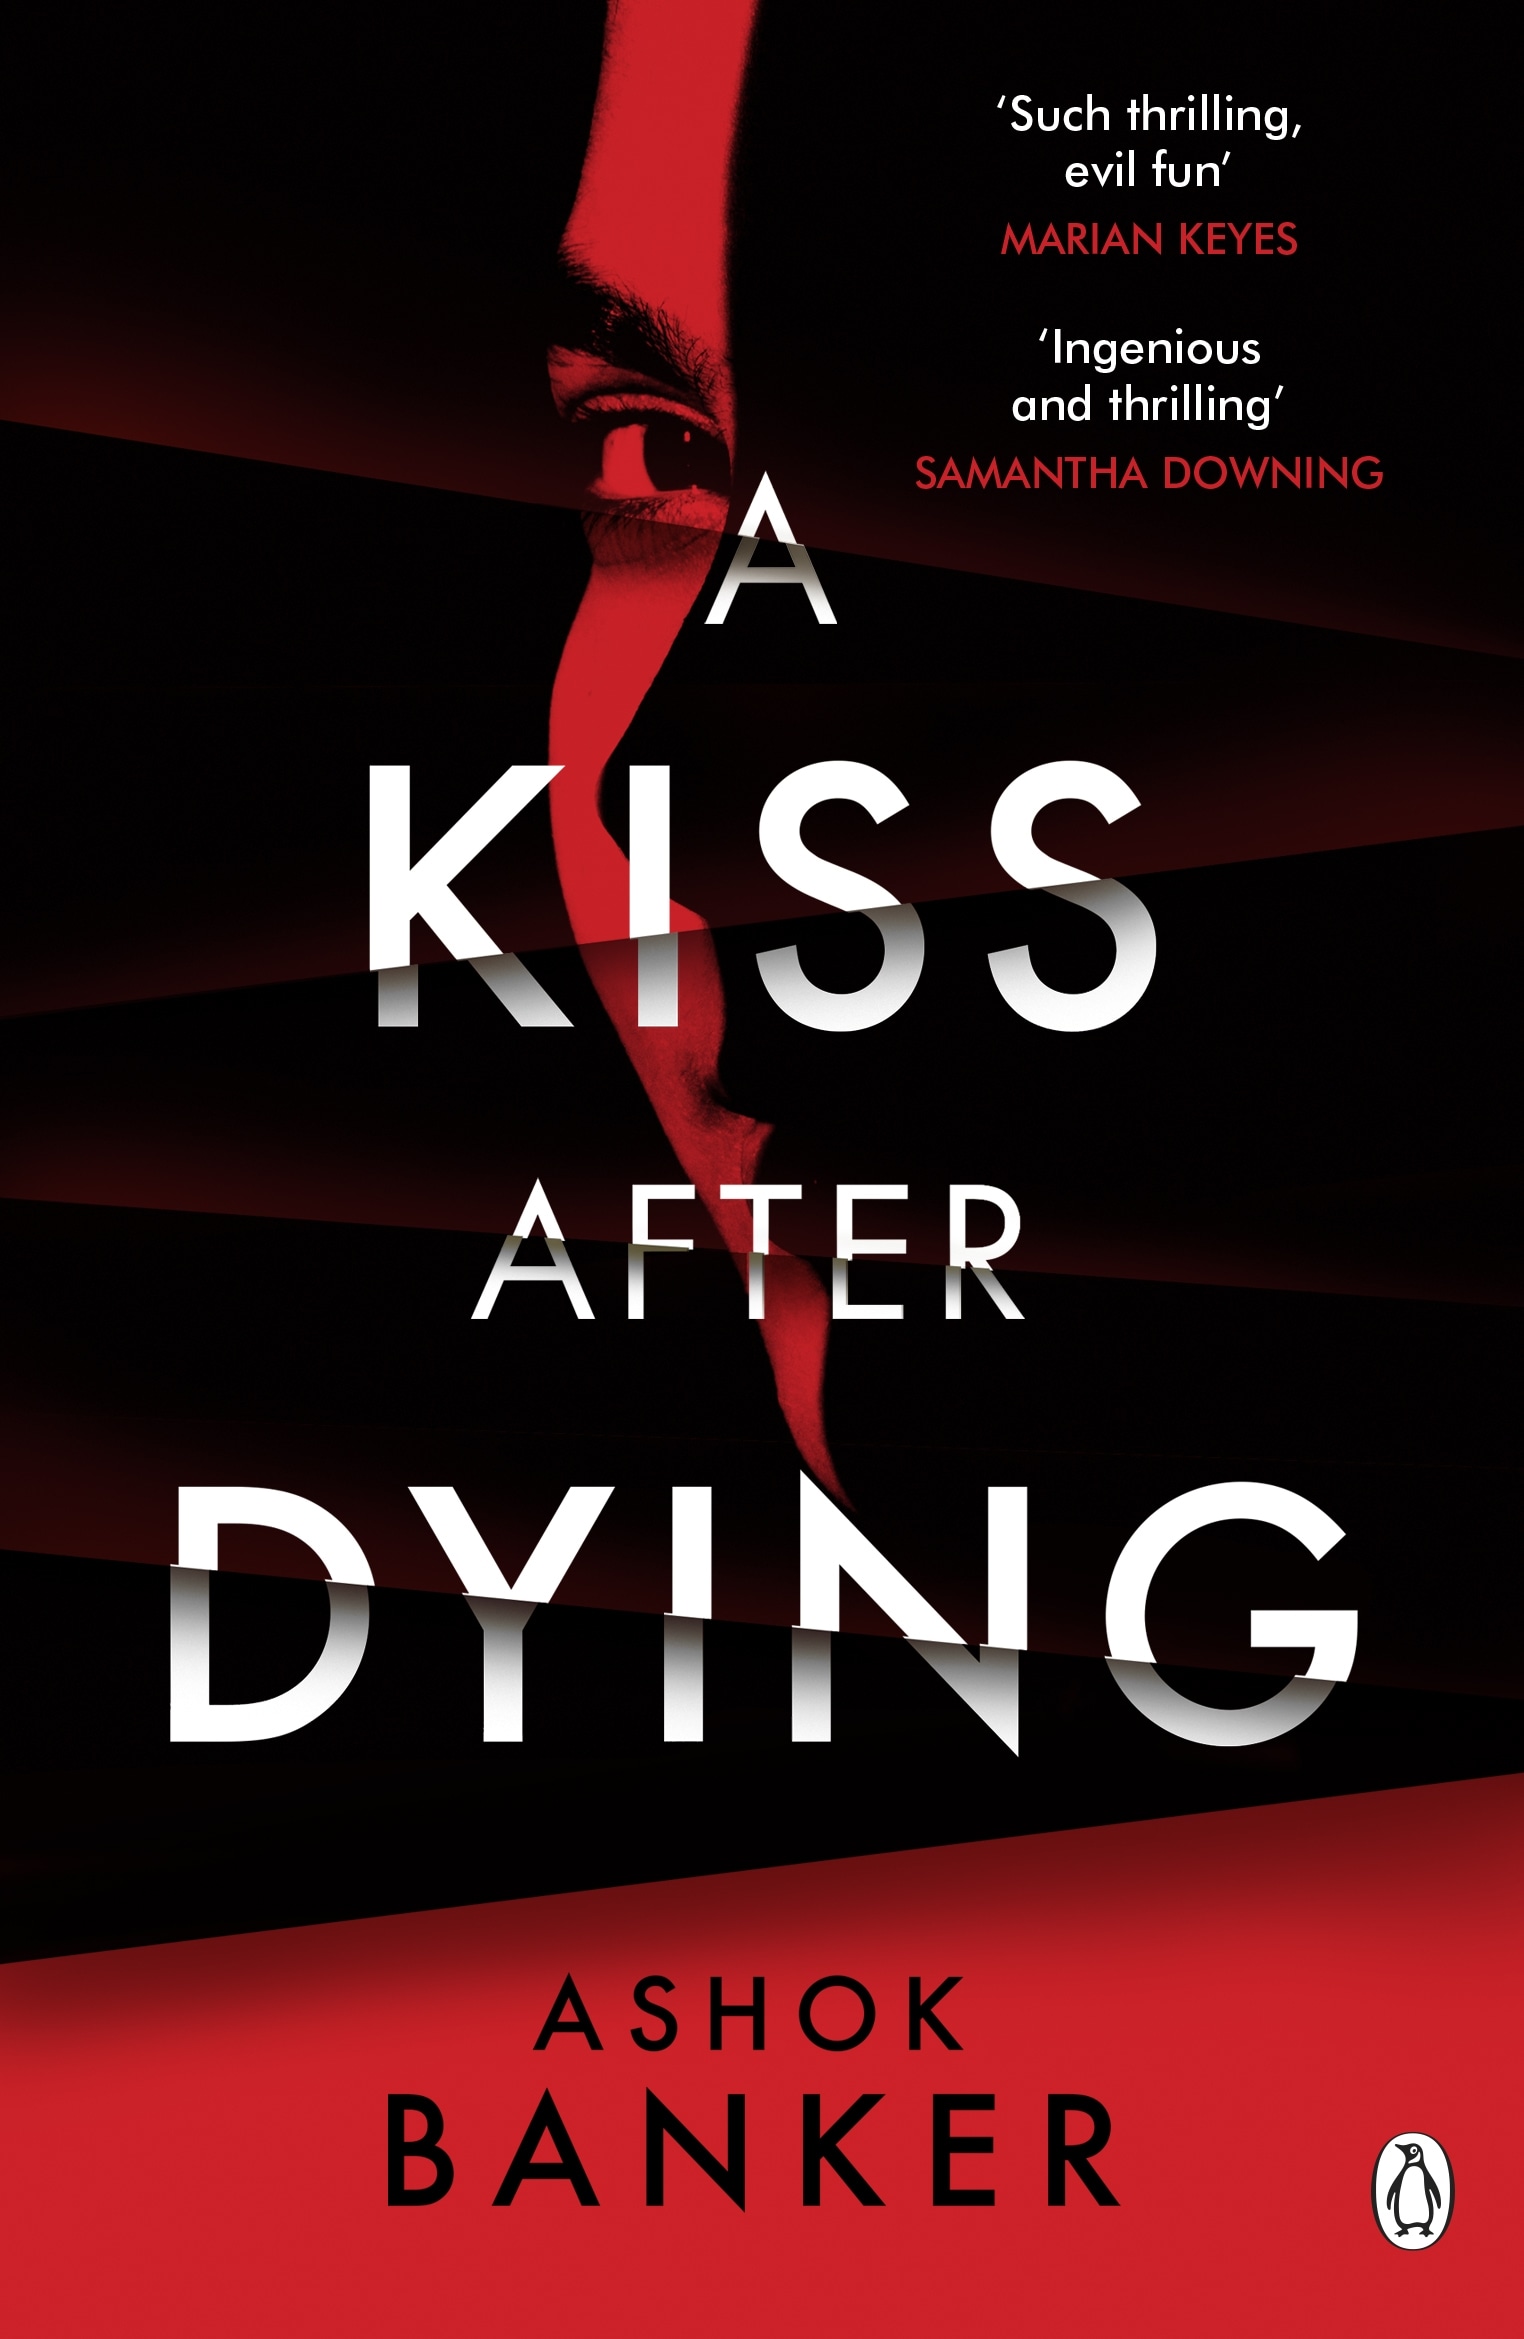 Book “A Kiss After Dying” by Ashok Banker — November 10, 2022